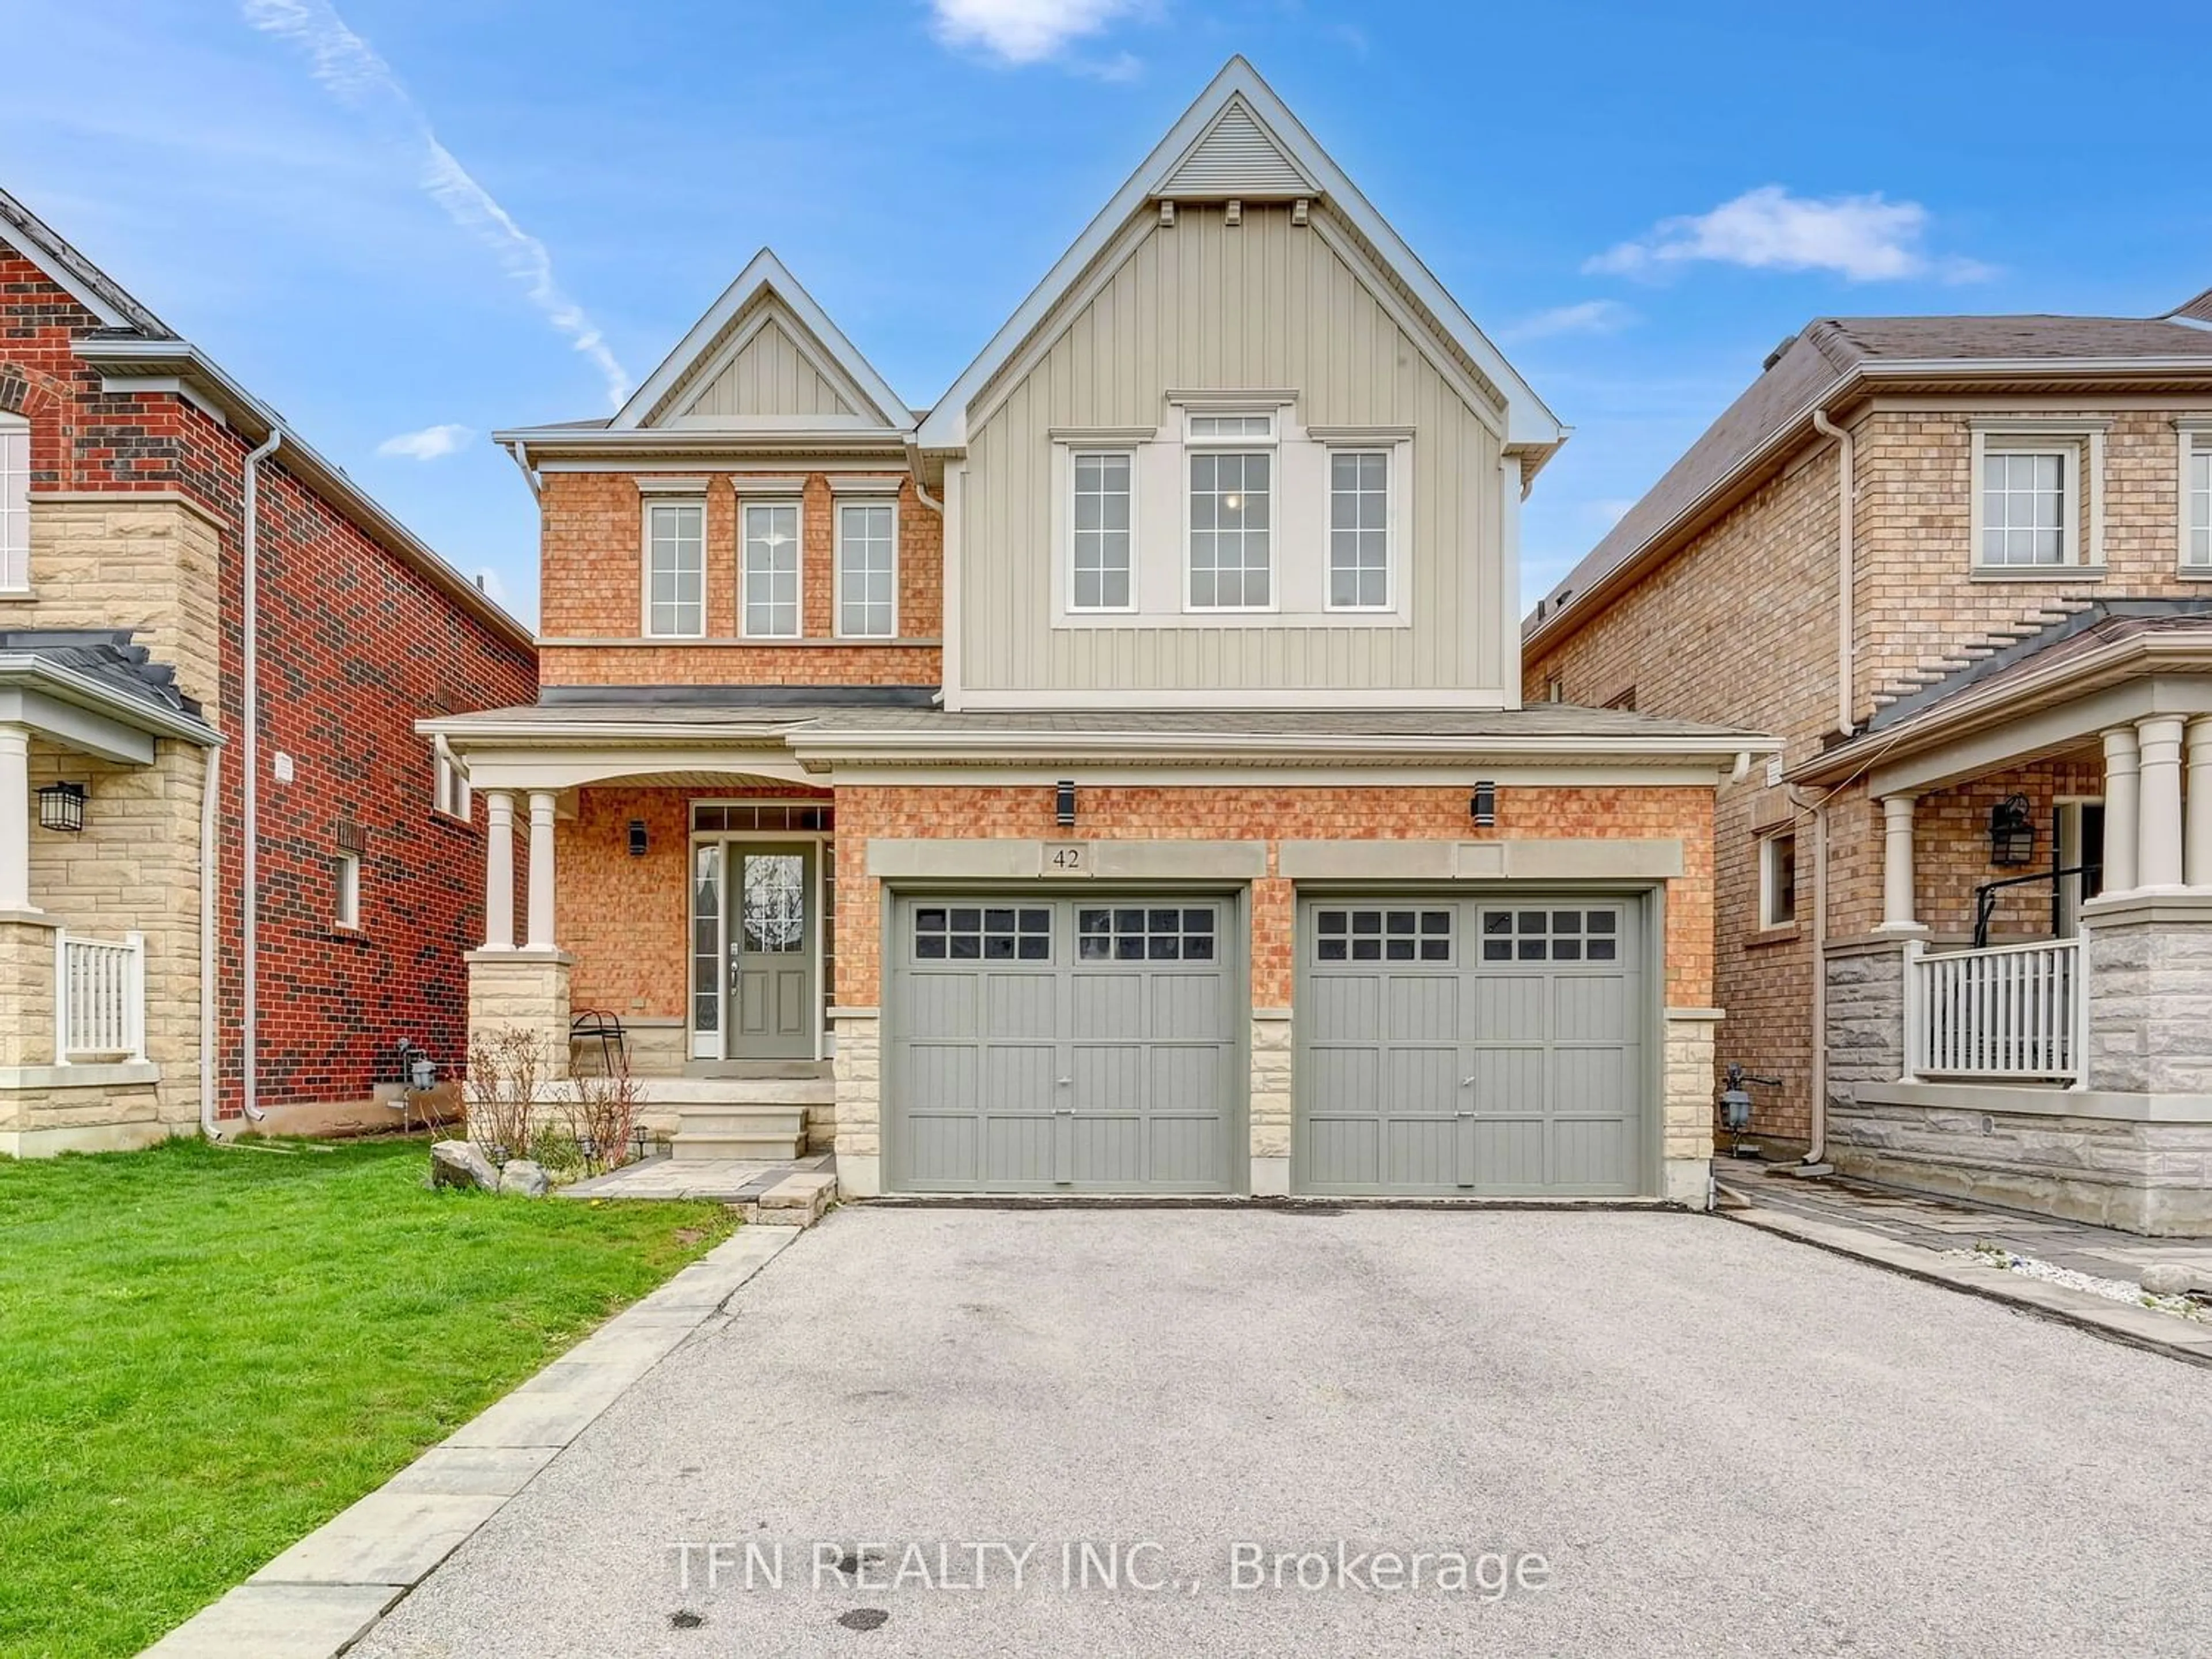 Home with brick exterior material for 42 Corwin St, Bradford West Gwillimbury Ontario L3Z 0J2